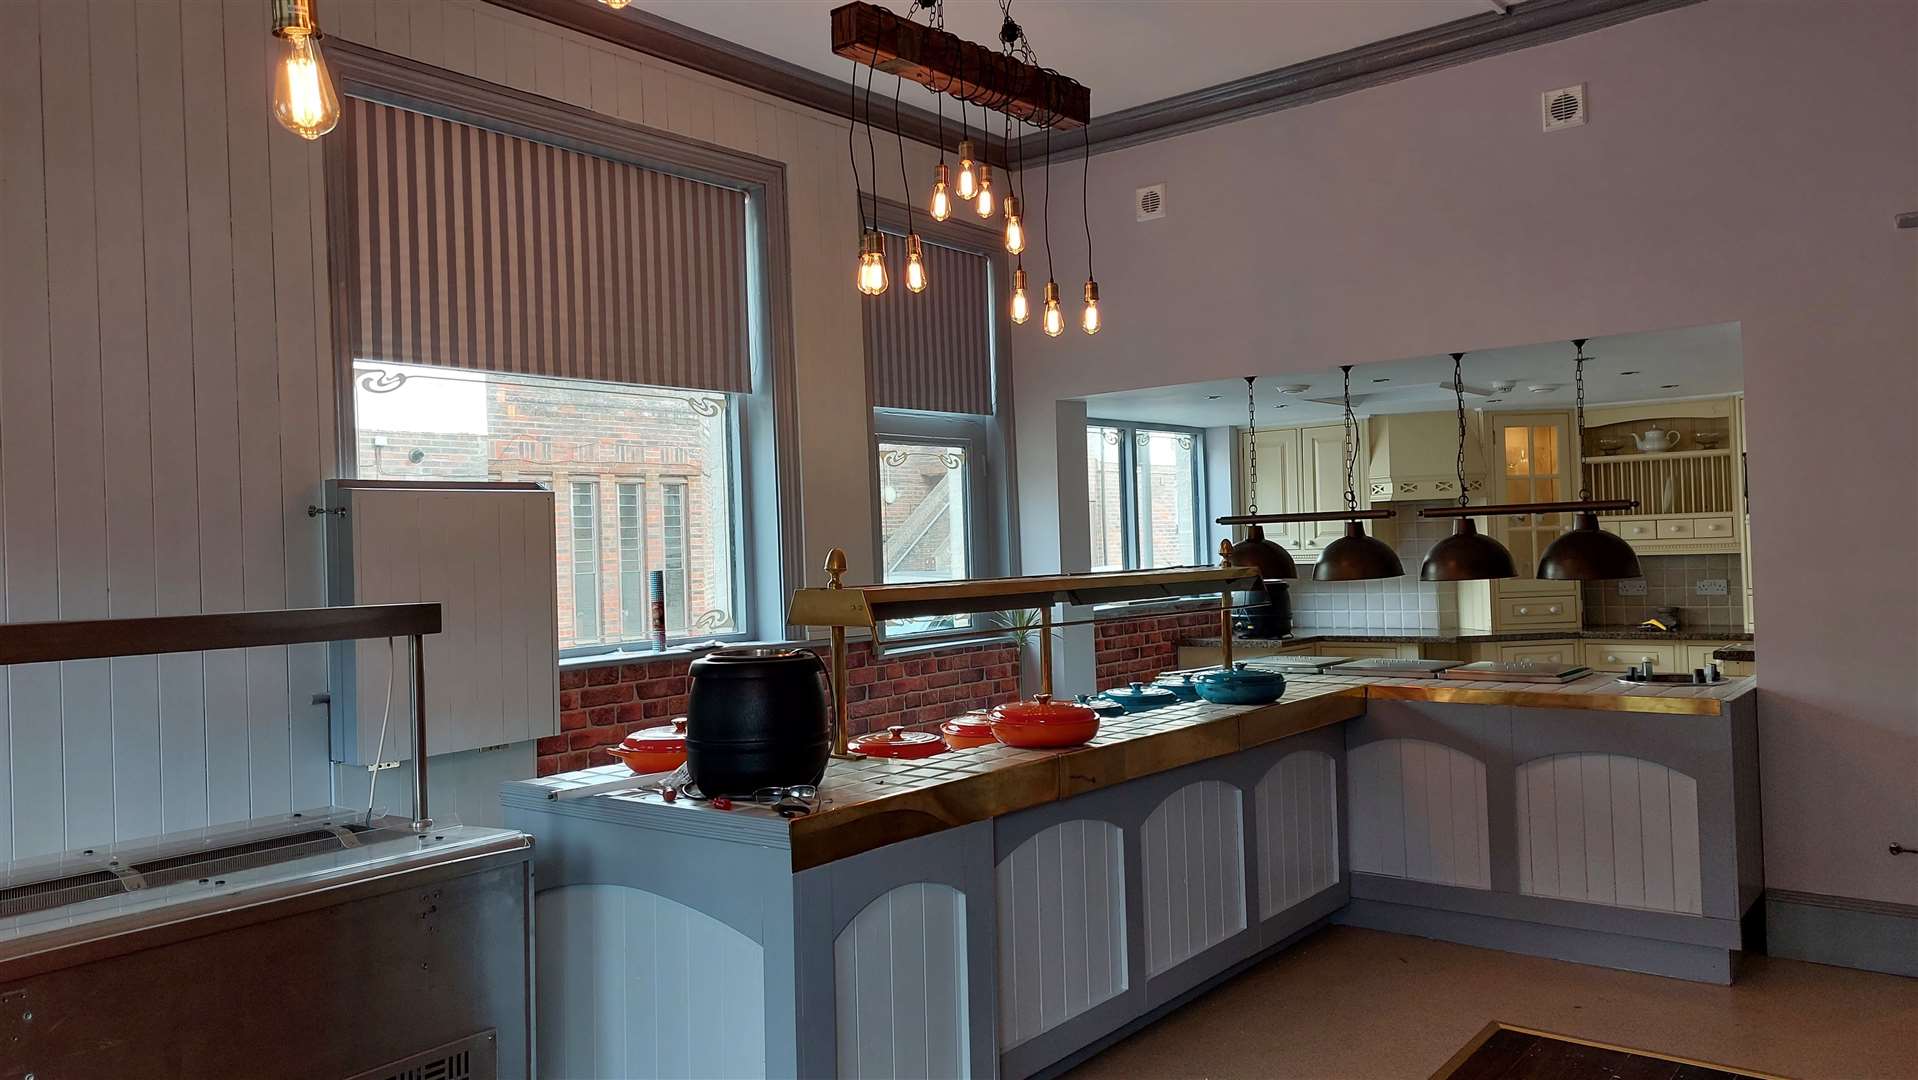 The newly renovated carvery will open on Mother's Day